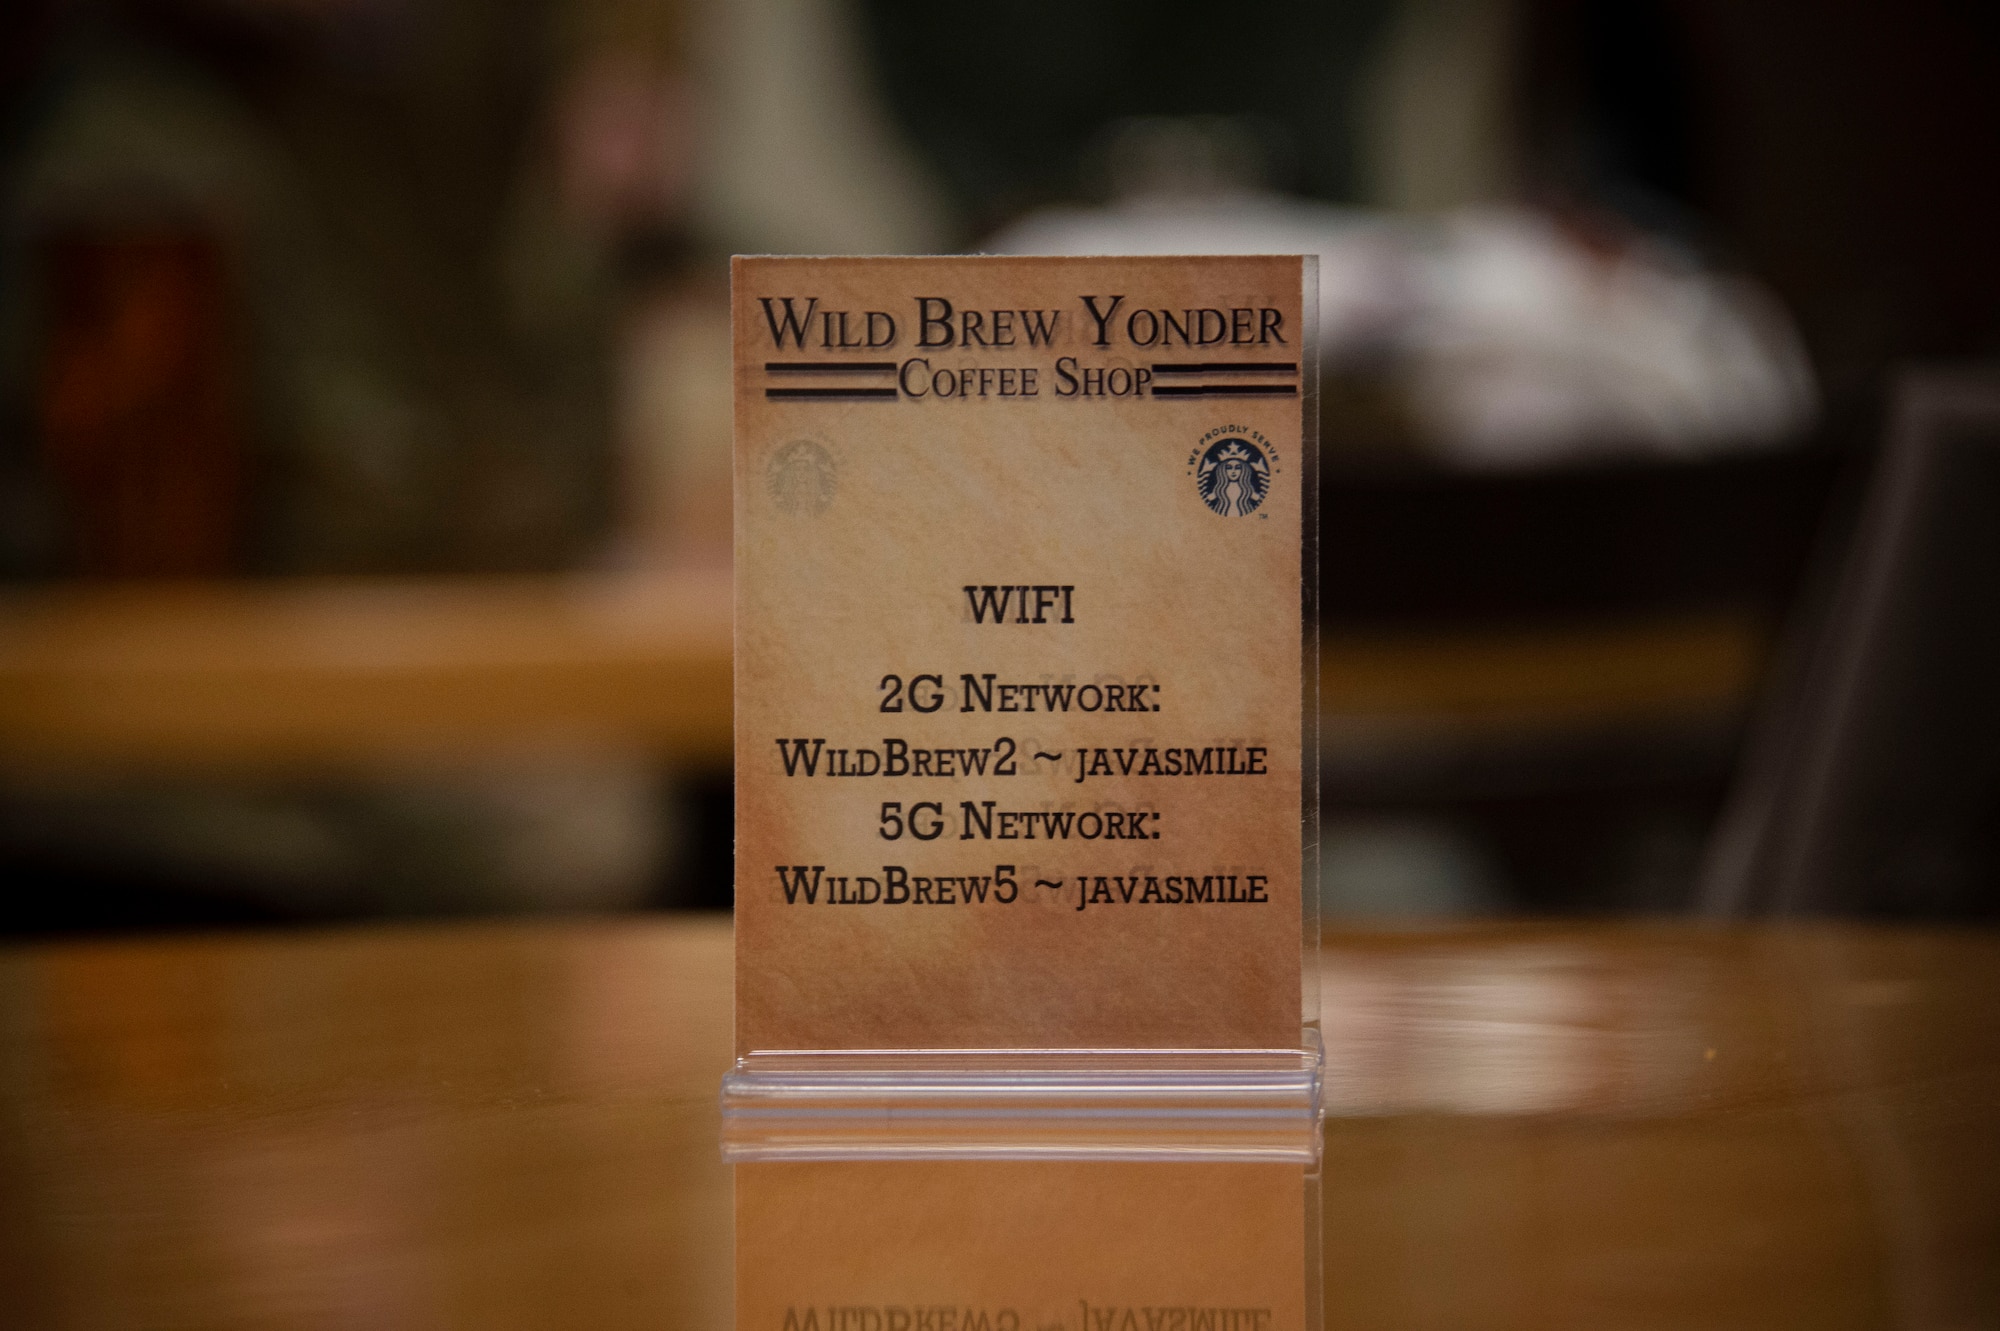 A placard for the Wild Brew Yonder coffee shop is placed on a table, Feb. 29, 2019 at Altus Air Force Base, Okla.